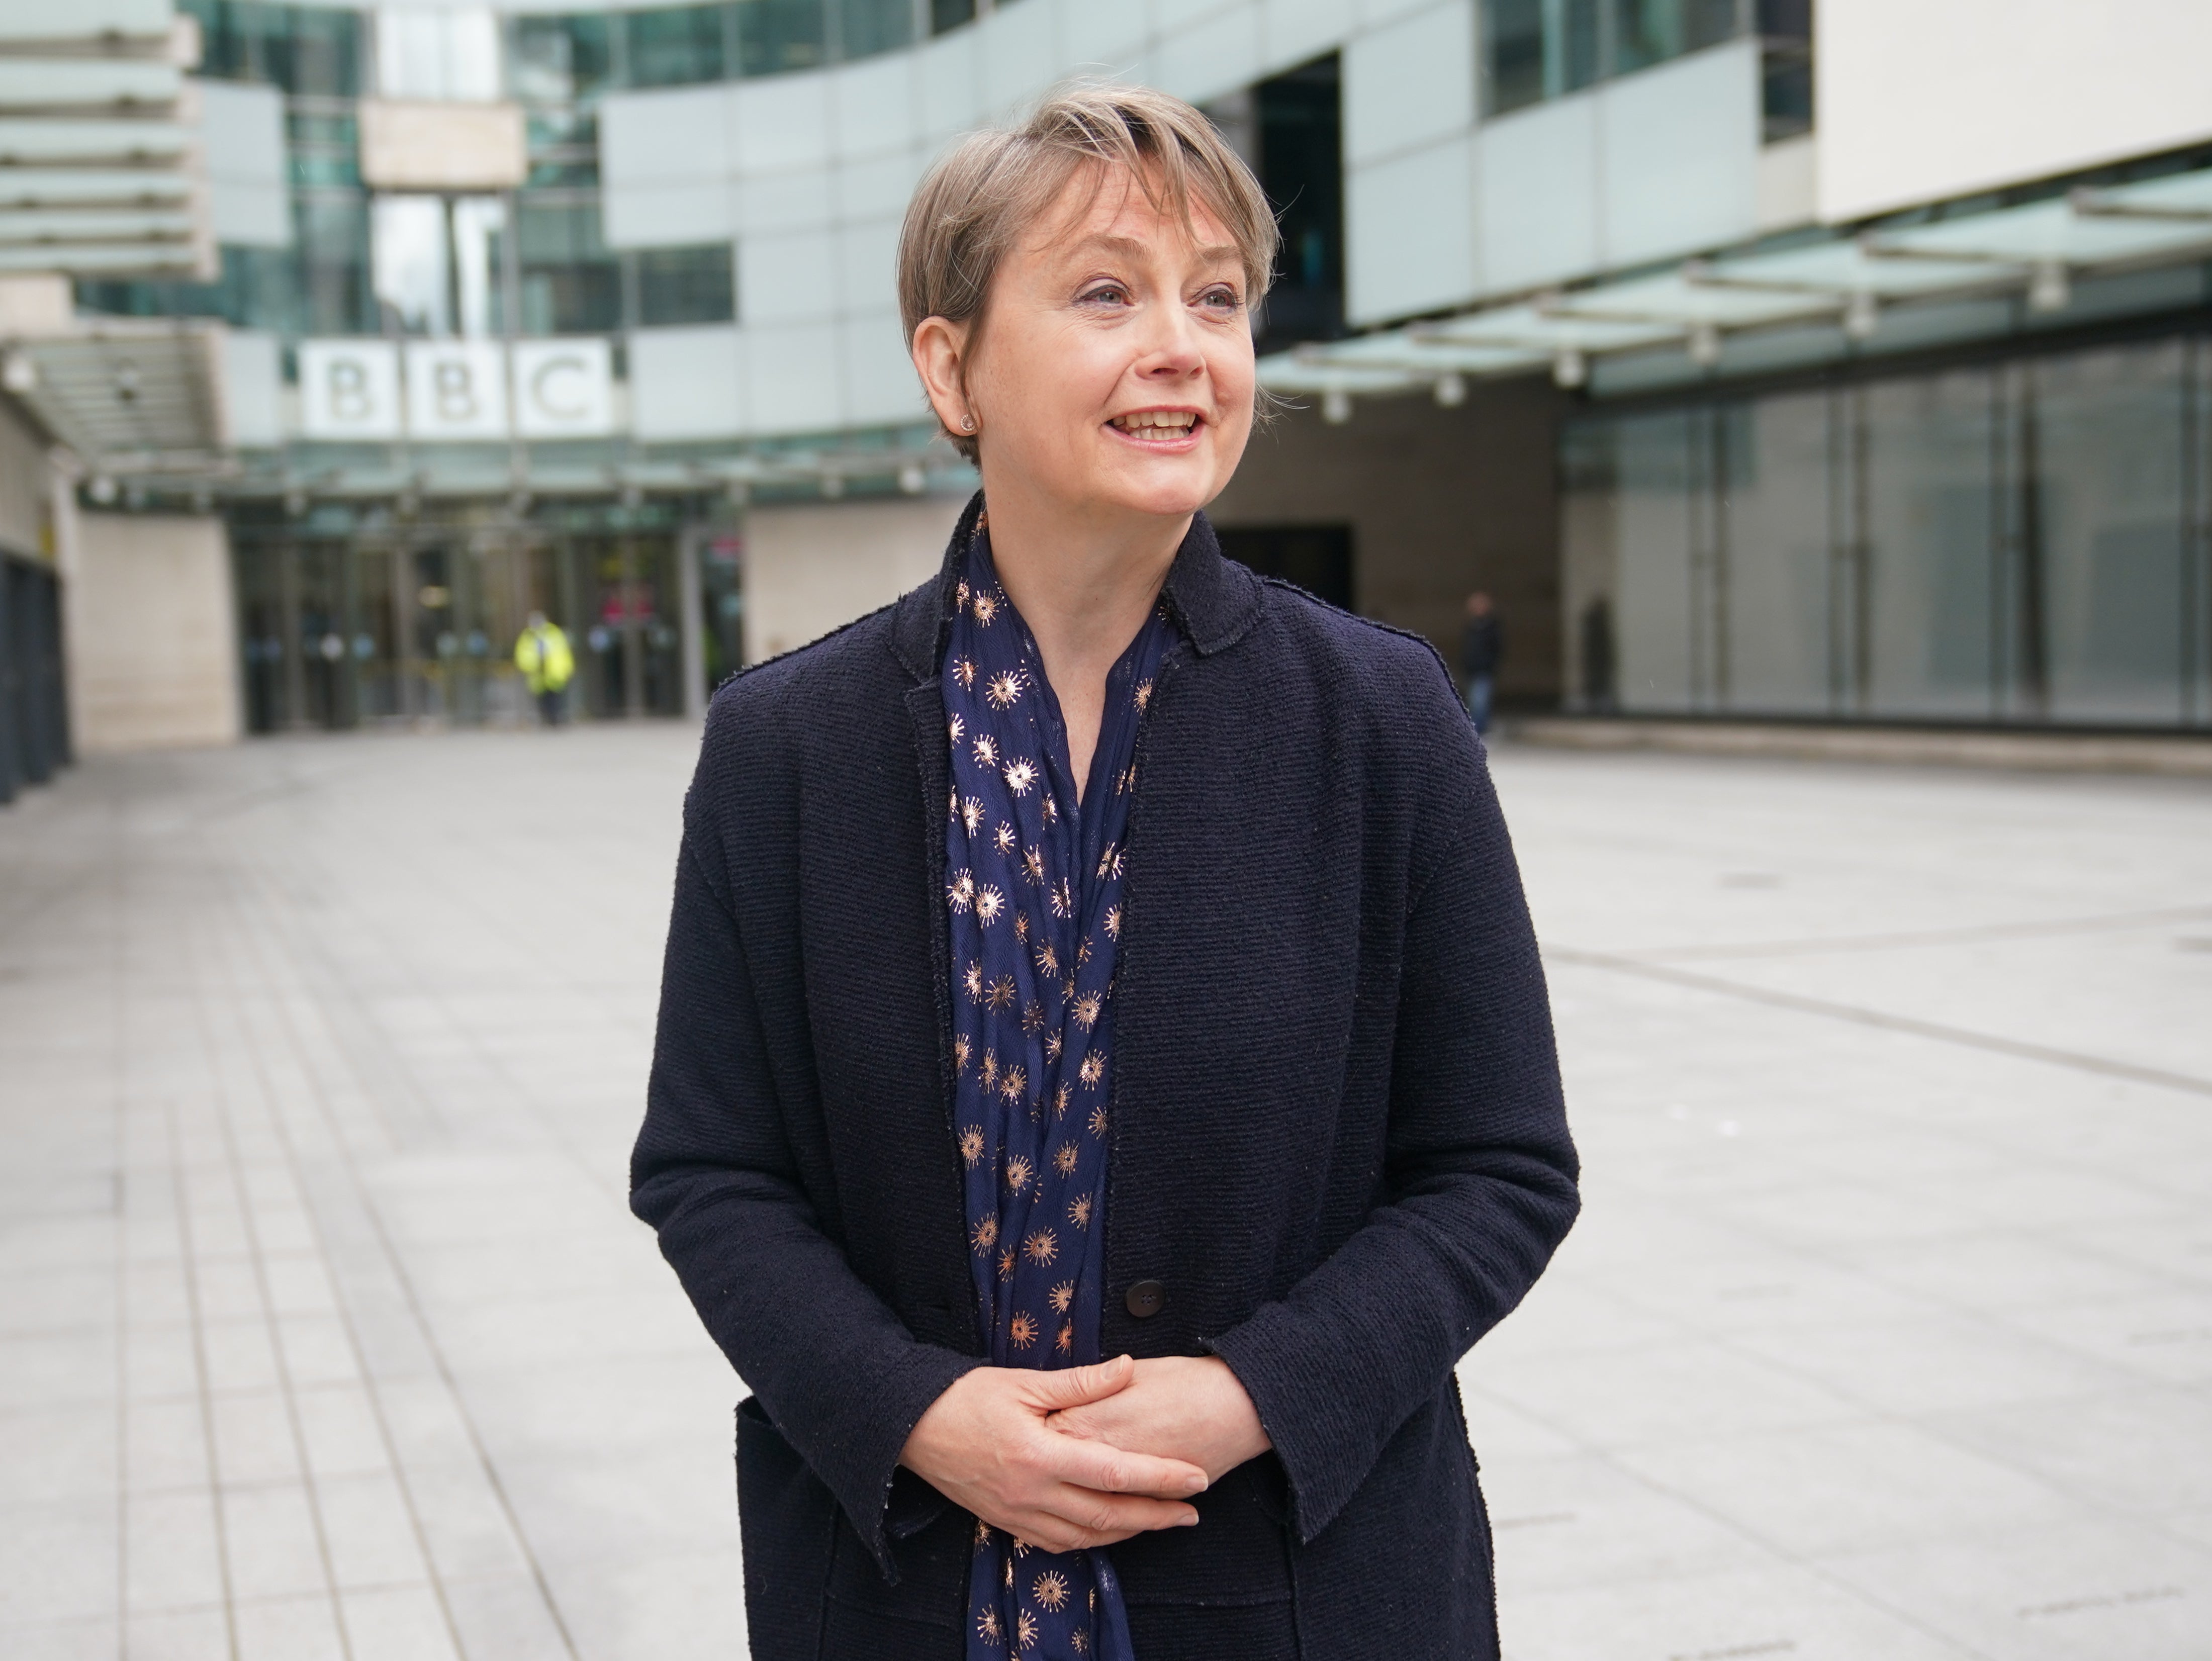 Yvette Cooper is the new shadow home secretary